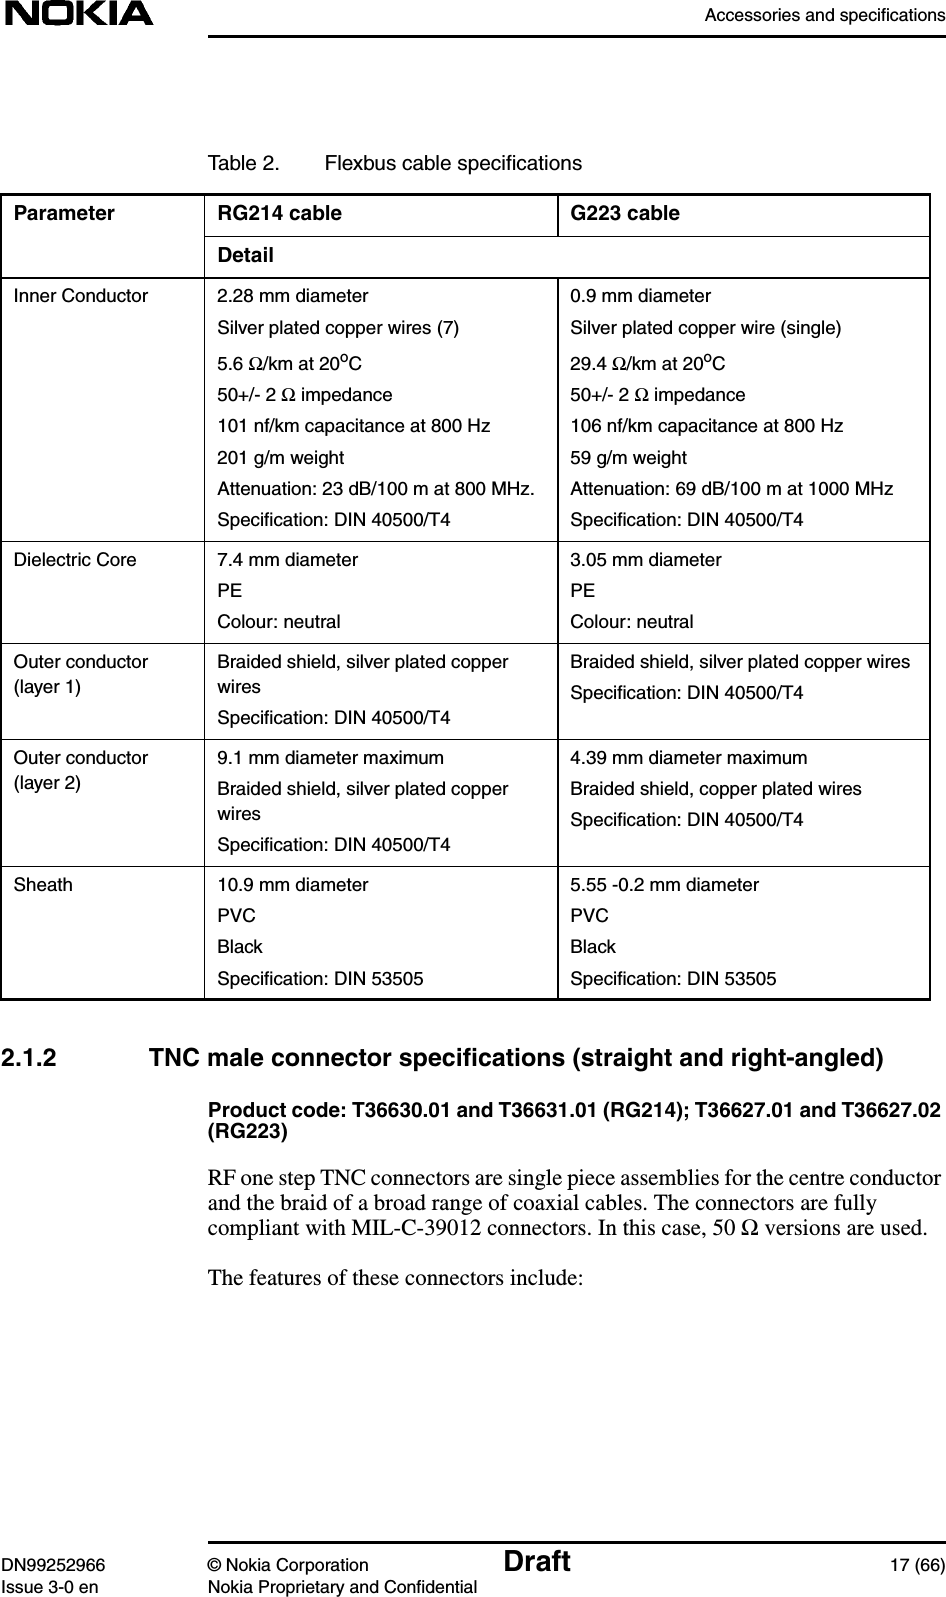 Accessories and specificationsDN99252966 © Nokia Corporation Draft 17 (66)Issue 3-0 en Nokia Proprietary and Confidential2.1.2 TNC male connector specifications (straight and right-angled)Product code: T36630.01 and T36631.01 (RG214); T36627.01 and T36627.02(RG223)RF one step TNC connectors are single piece assemblies for the centre conductorand the braid of a broad range of coaxial cables. The connectors are fullycompliant with MIL-C-39012 connectors. In this case, 50 Ω versions are used.The features of these connectors include:Table 2. Flexbus cable speciﬁcationsParameter RG214 cable G223 cableDetailInner Conductor 2.28 mm diameterSilver plated copper wires (7)5.6 Ω/km at 20oC50+/- 2 Ω impedance101 nf/km capacitance at 800 Hz201 g/m weightAttenuation: 23 dB/100 m at 800 MHz.Speciﬁcation: DIN 40500/T40.9 mm diameterSilver plated copper wire (single)29.4 Ω/km at 20oC50+/- 2 Ω impedance106 nf/km capacitance at 800 Hz59 g/m weightAttenuation: 69 dB/100 m at 1000 MHzSpeciﬁcation: DIN 40500/T4Dielectric Core 7.4 mm diameterPEColour: neutral3.05 mm diameterPEColour: neutralOuter conductor(layer 1)Braided shield, silver plated copperwiresSpeciﬁcation: DIN 40500/T4Braided shield, silver plated copper wiresSpeciﬁcation: DIN 40500/T4Outer conductor(layer 2)9.1 mm diameter maximumBraided shield, silver plated copperwiresSpeciﬁcation: DIN 40500/T44.39 mm diameter maximumBraided shield, copper plated wiresSpeciﬁcation: DIN 40500/T4Sheath 10.9 mm diameterPVCBlackSpeciﬁcation: DIN 535055.55 -0.2 mm diameterPVCBlackSpeciﬁcation: DIN 53505